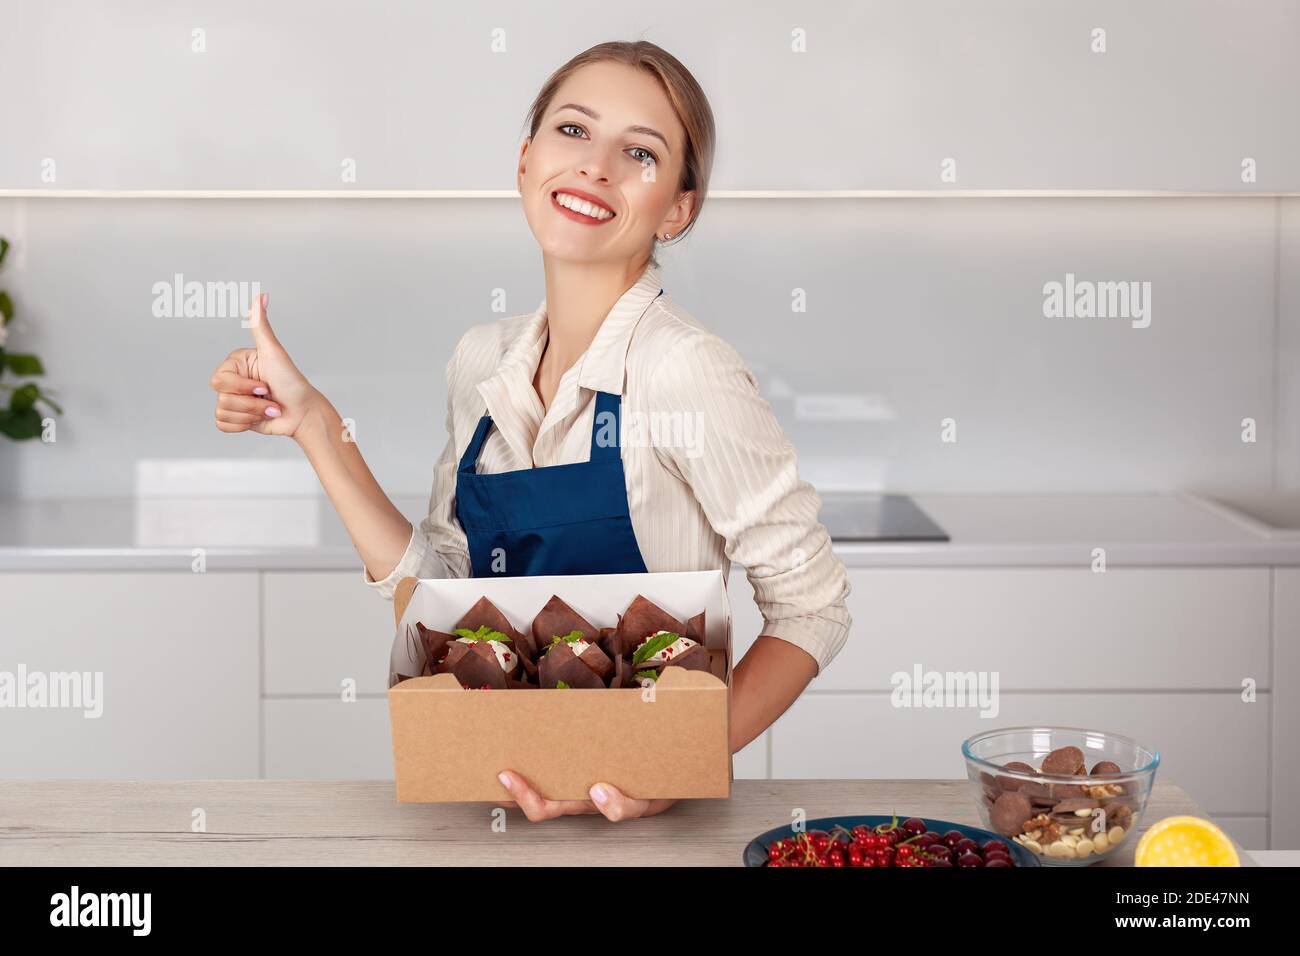 Young smiling woman baker in uniform holding paper delivery packaging box with ready cupcakes or muffins and showing thumb up. Concept of successful f Stock Photo